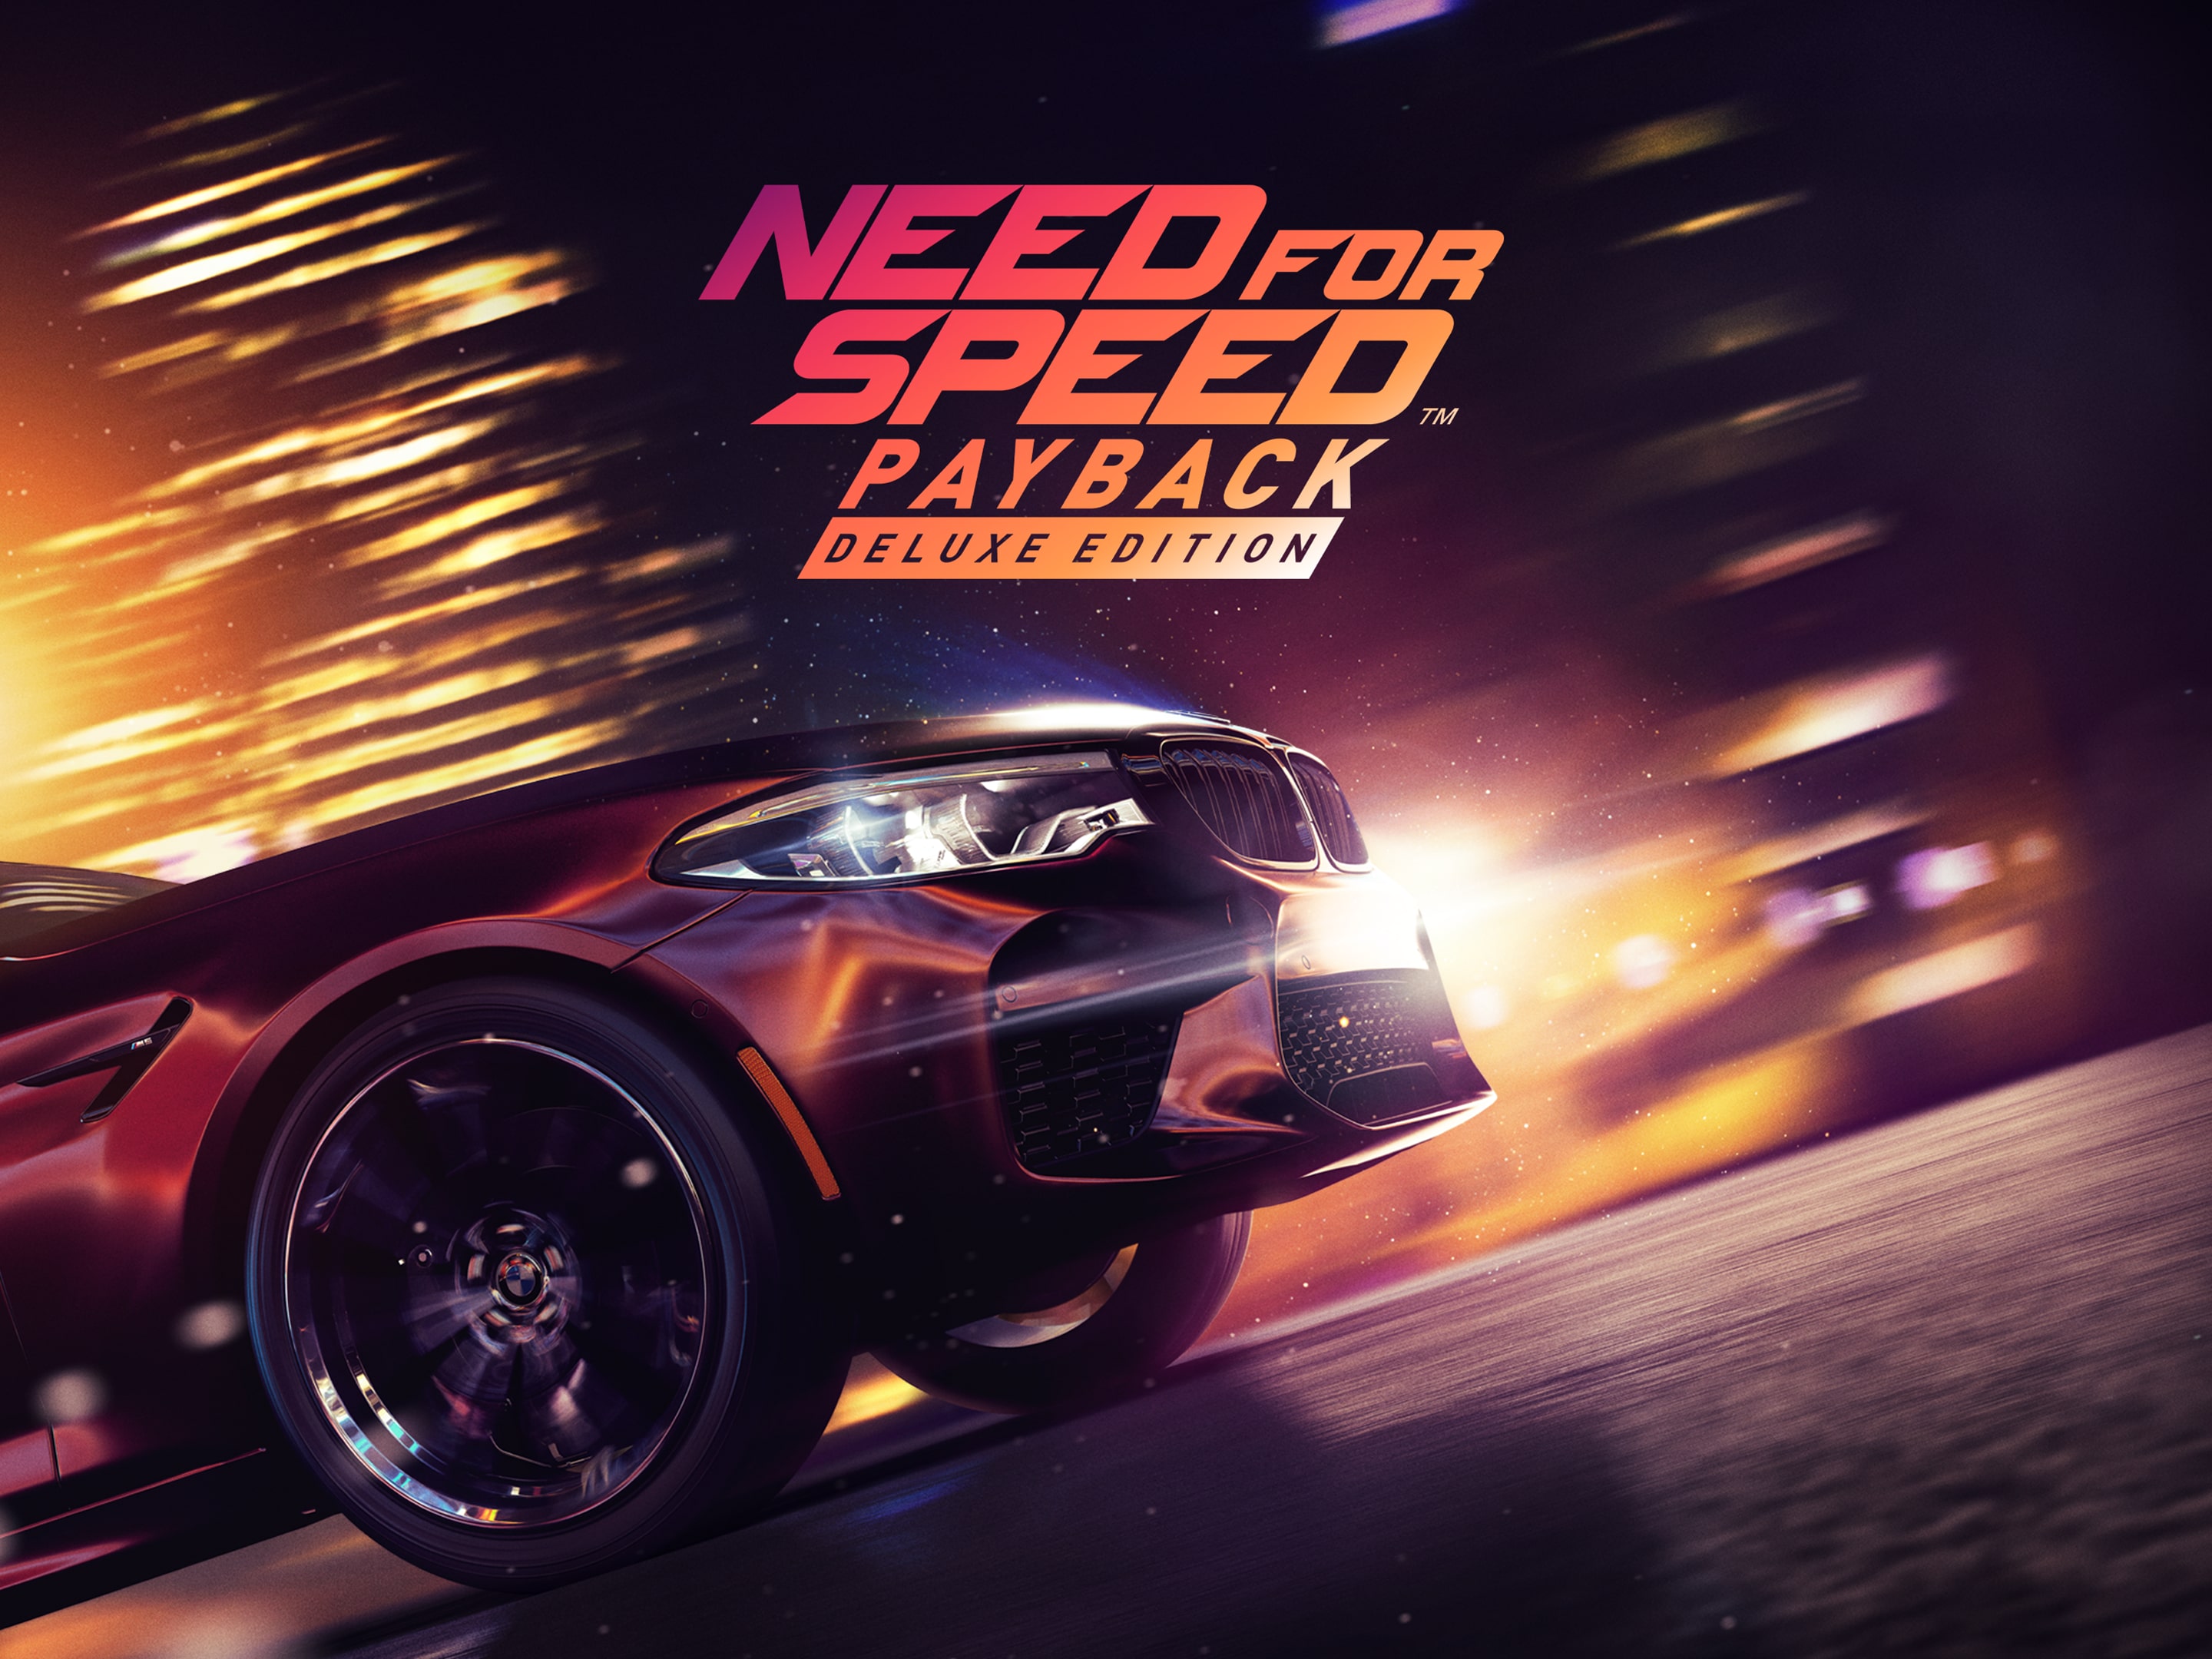 Need for Speed Payback (ps4). Need for Speed Payback пс4. Нфс пейбек ПС 3. Nfs payback ps4